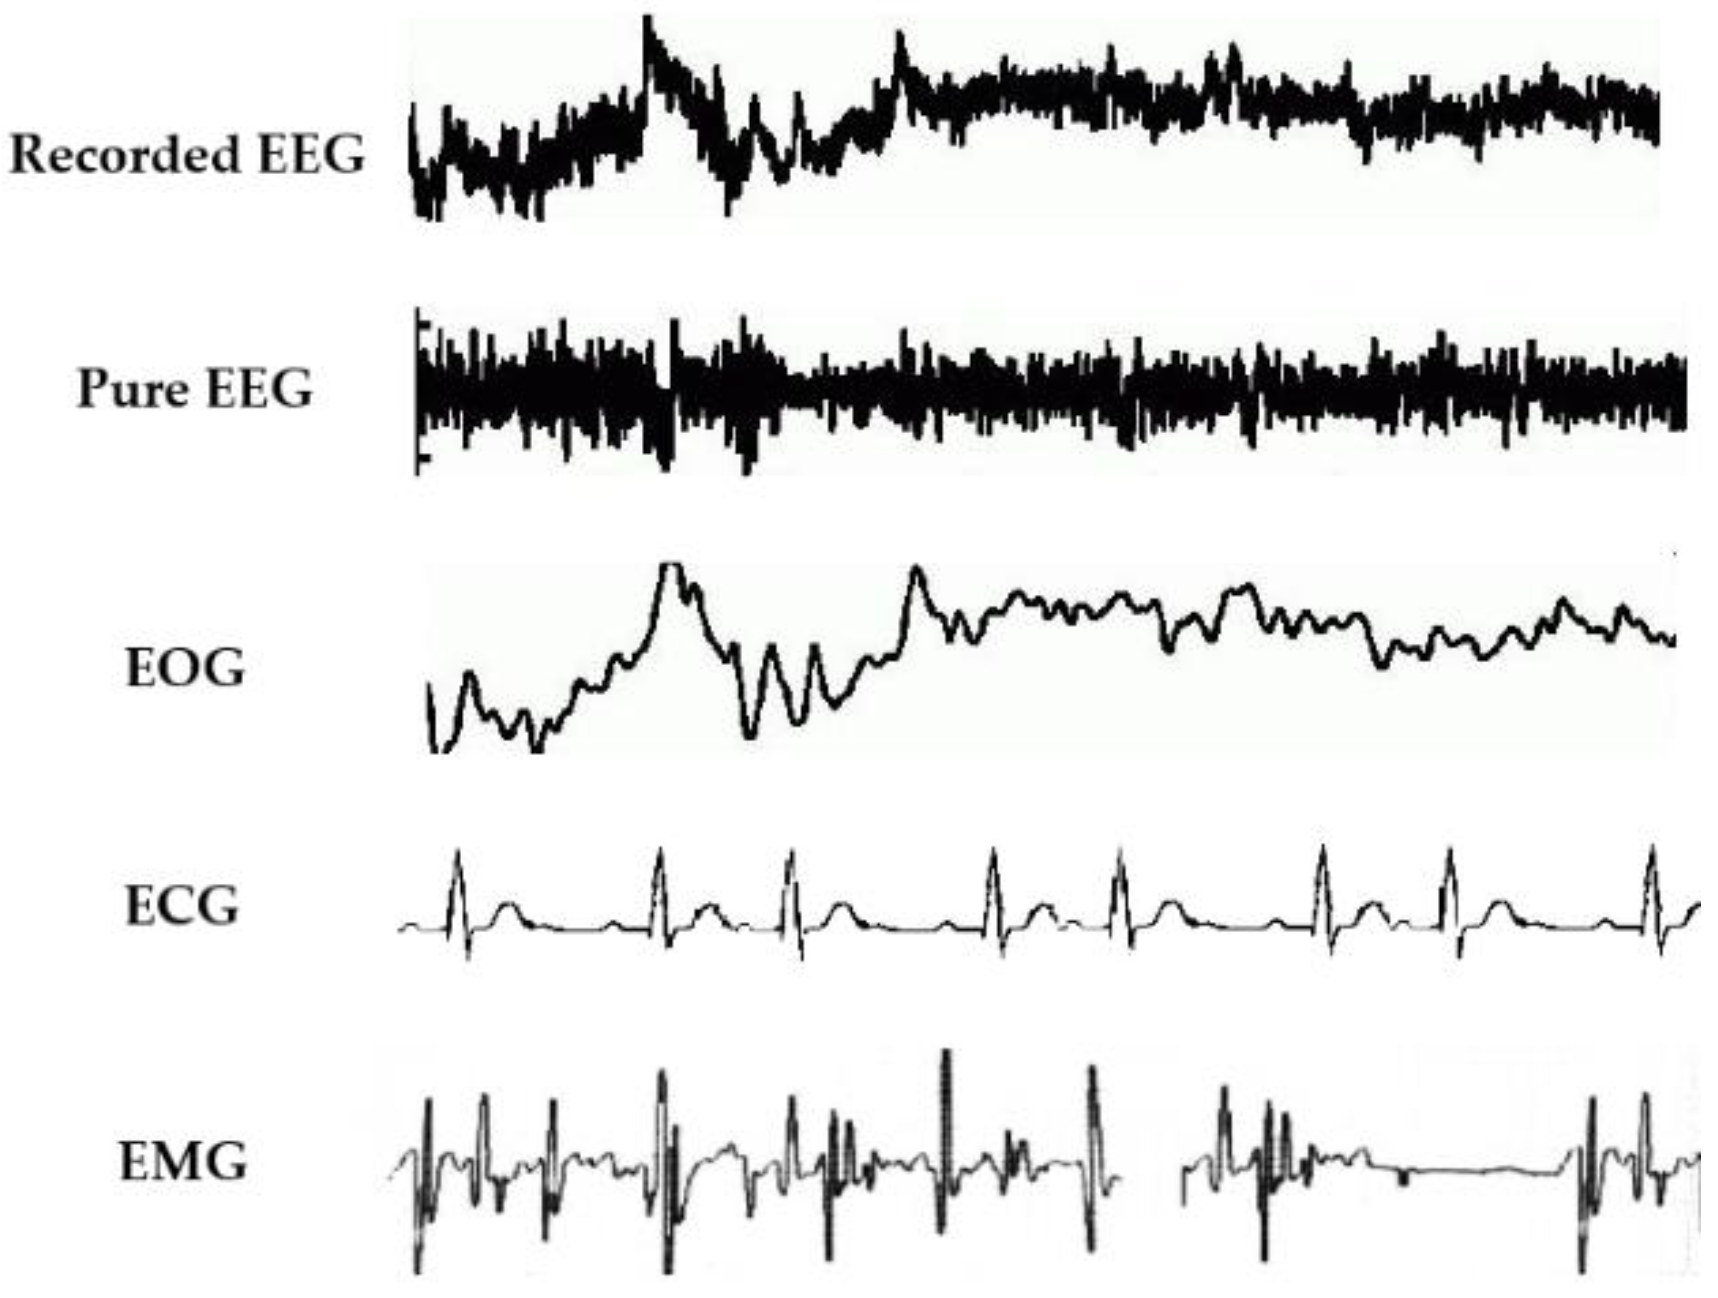 Sensors | Free Full-Text | Removal of Artifacts from EEG Signals: A Review